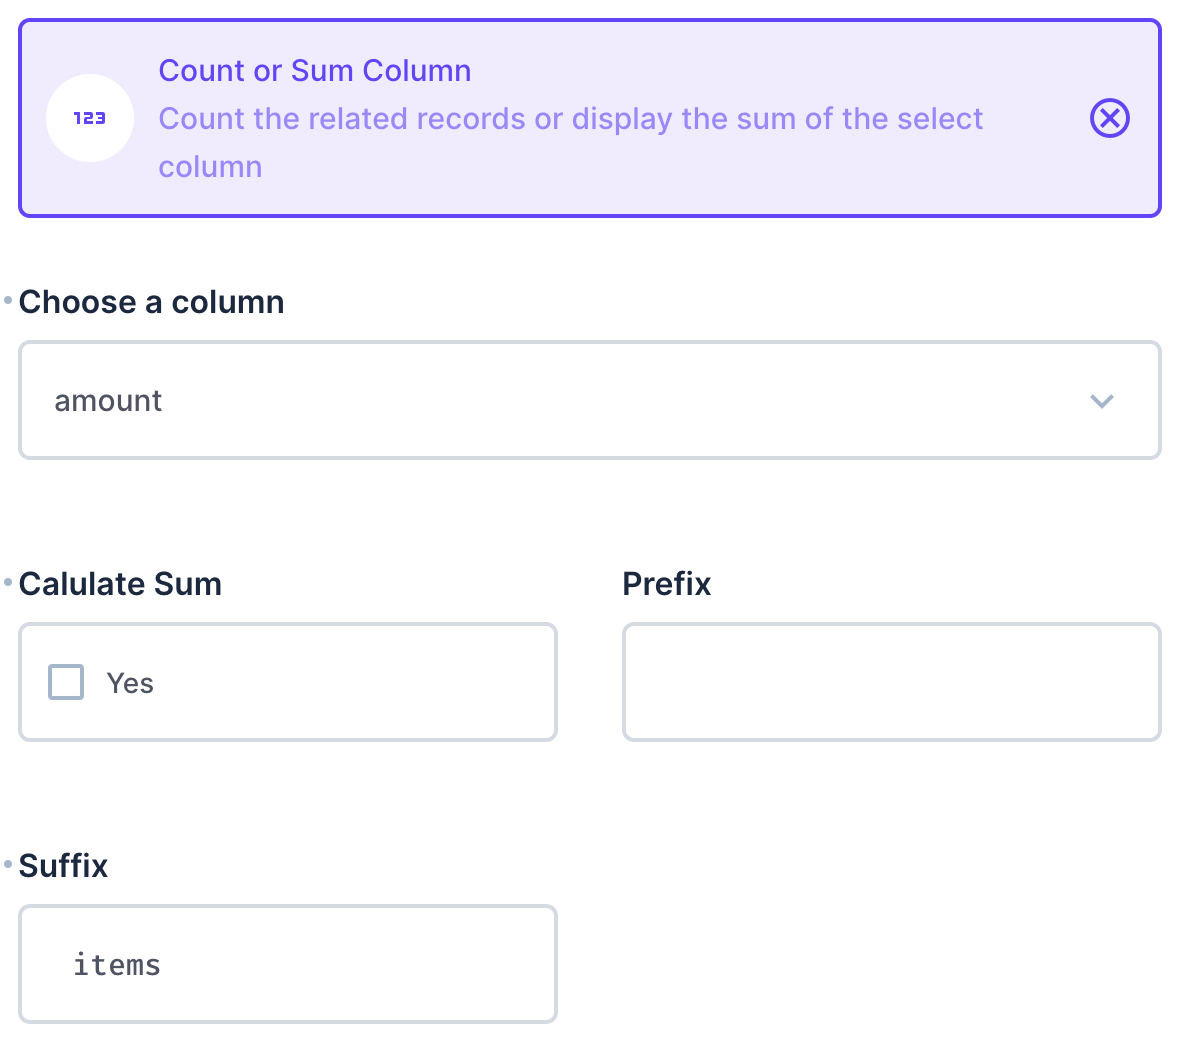 New display options showing a select field for column, a checkbox for calculate sum, and text fields for prefix and suffix.